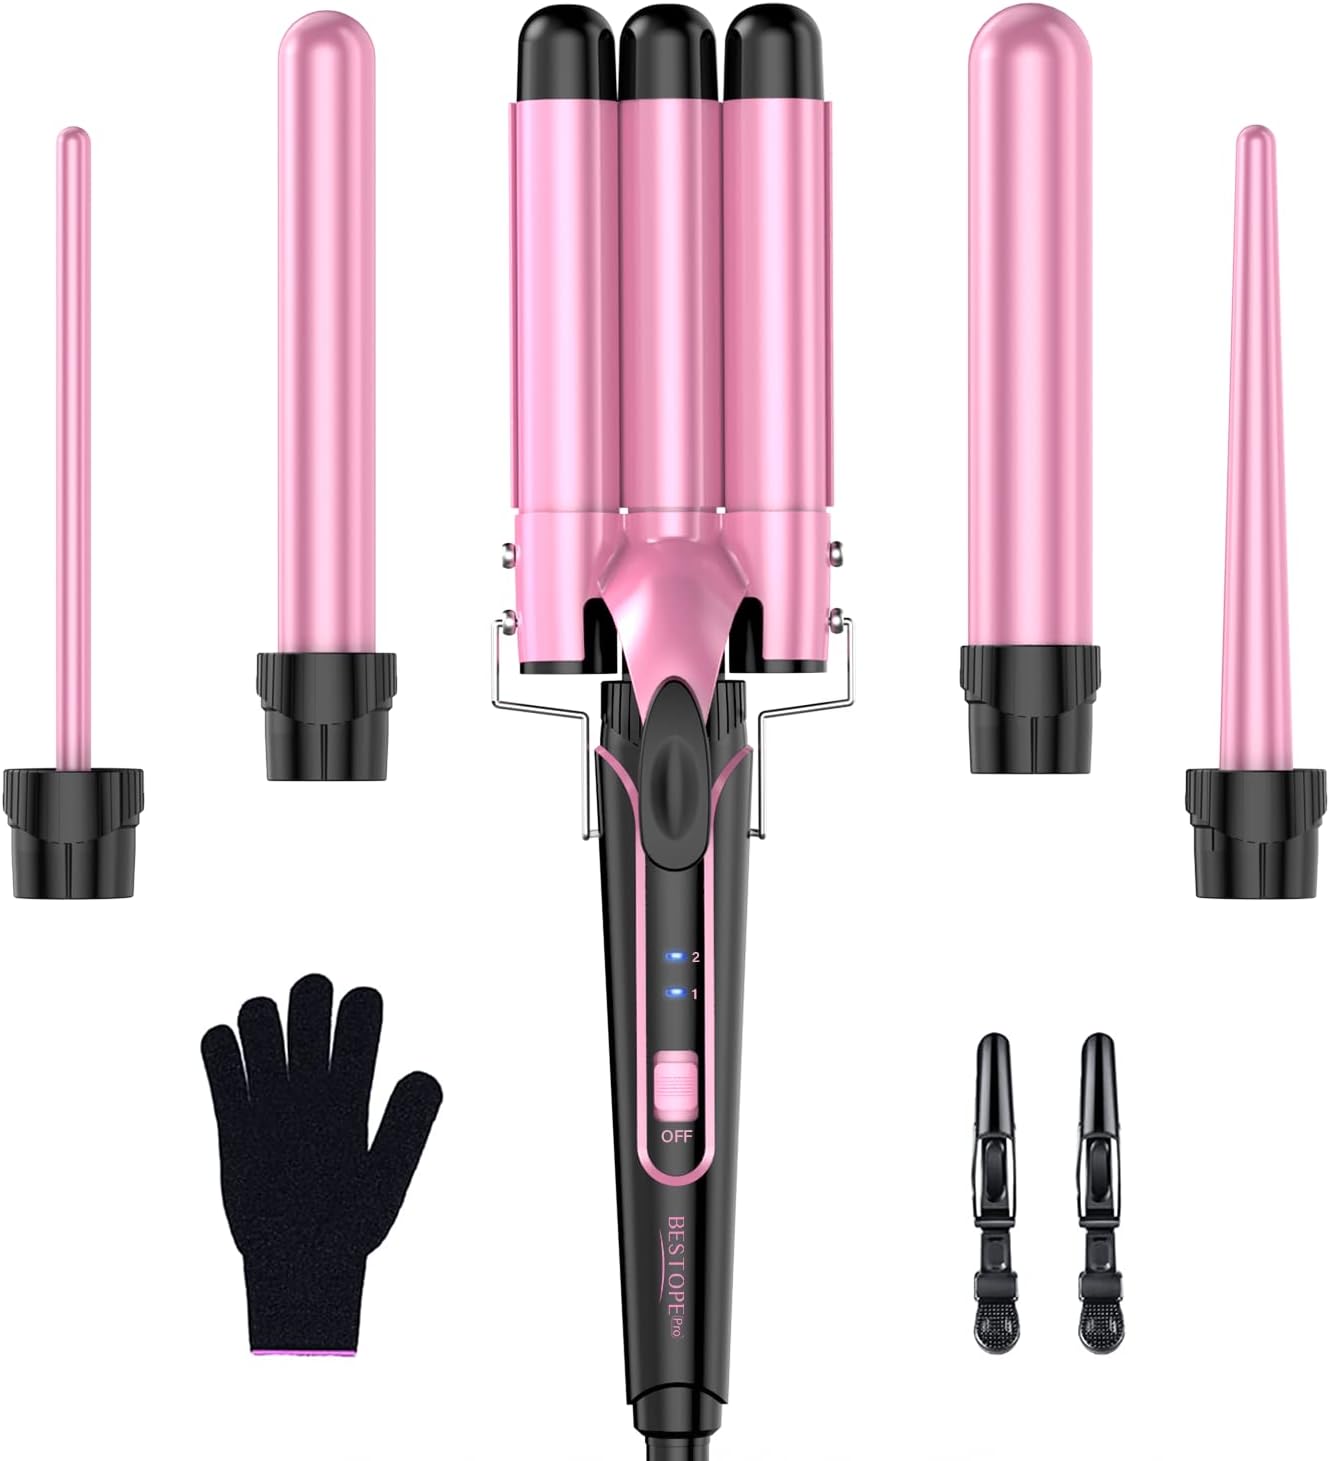 Waver Curling Iron Curling Wand - BESTOPE PRO 5 in 1 [...]